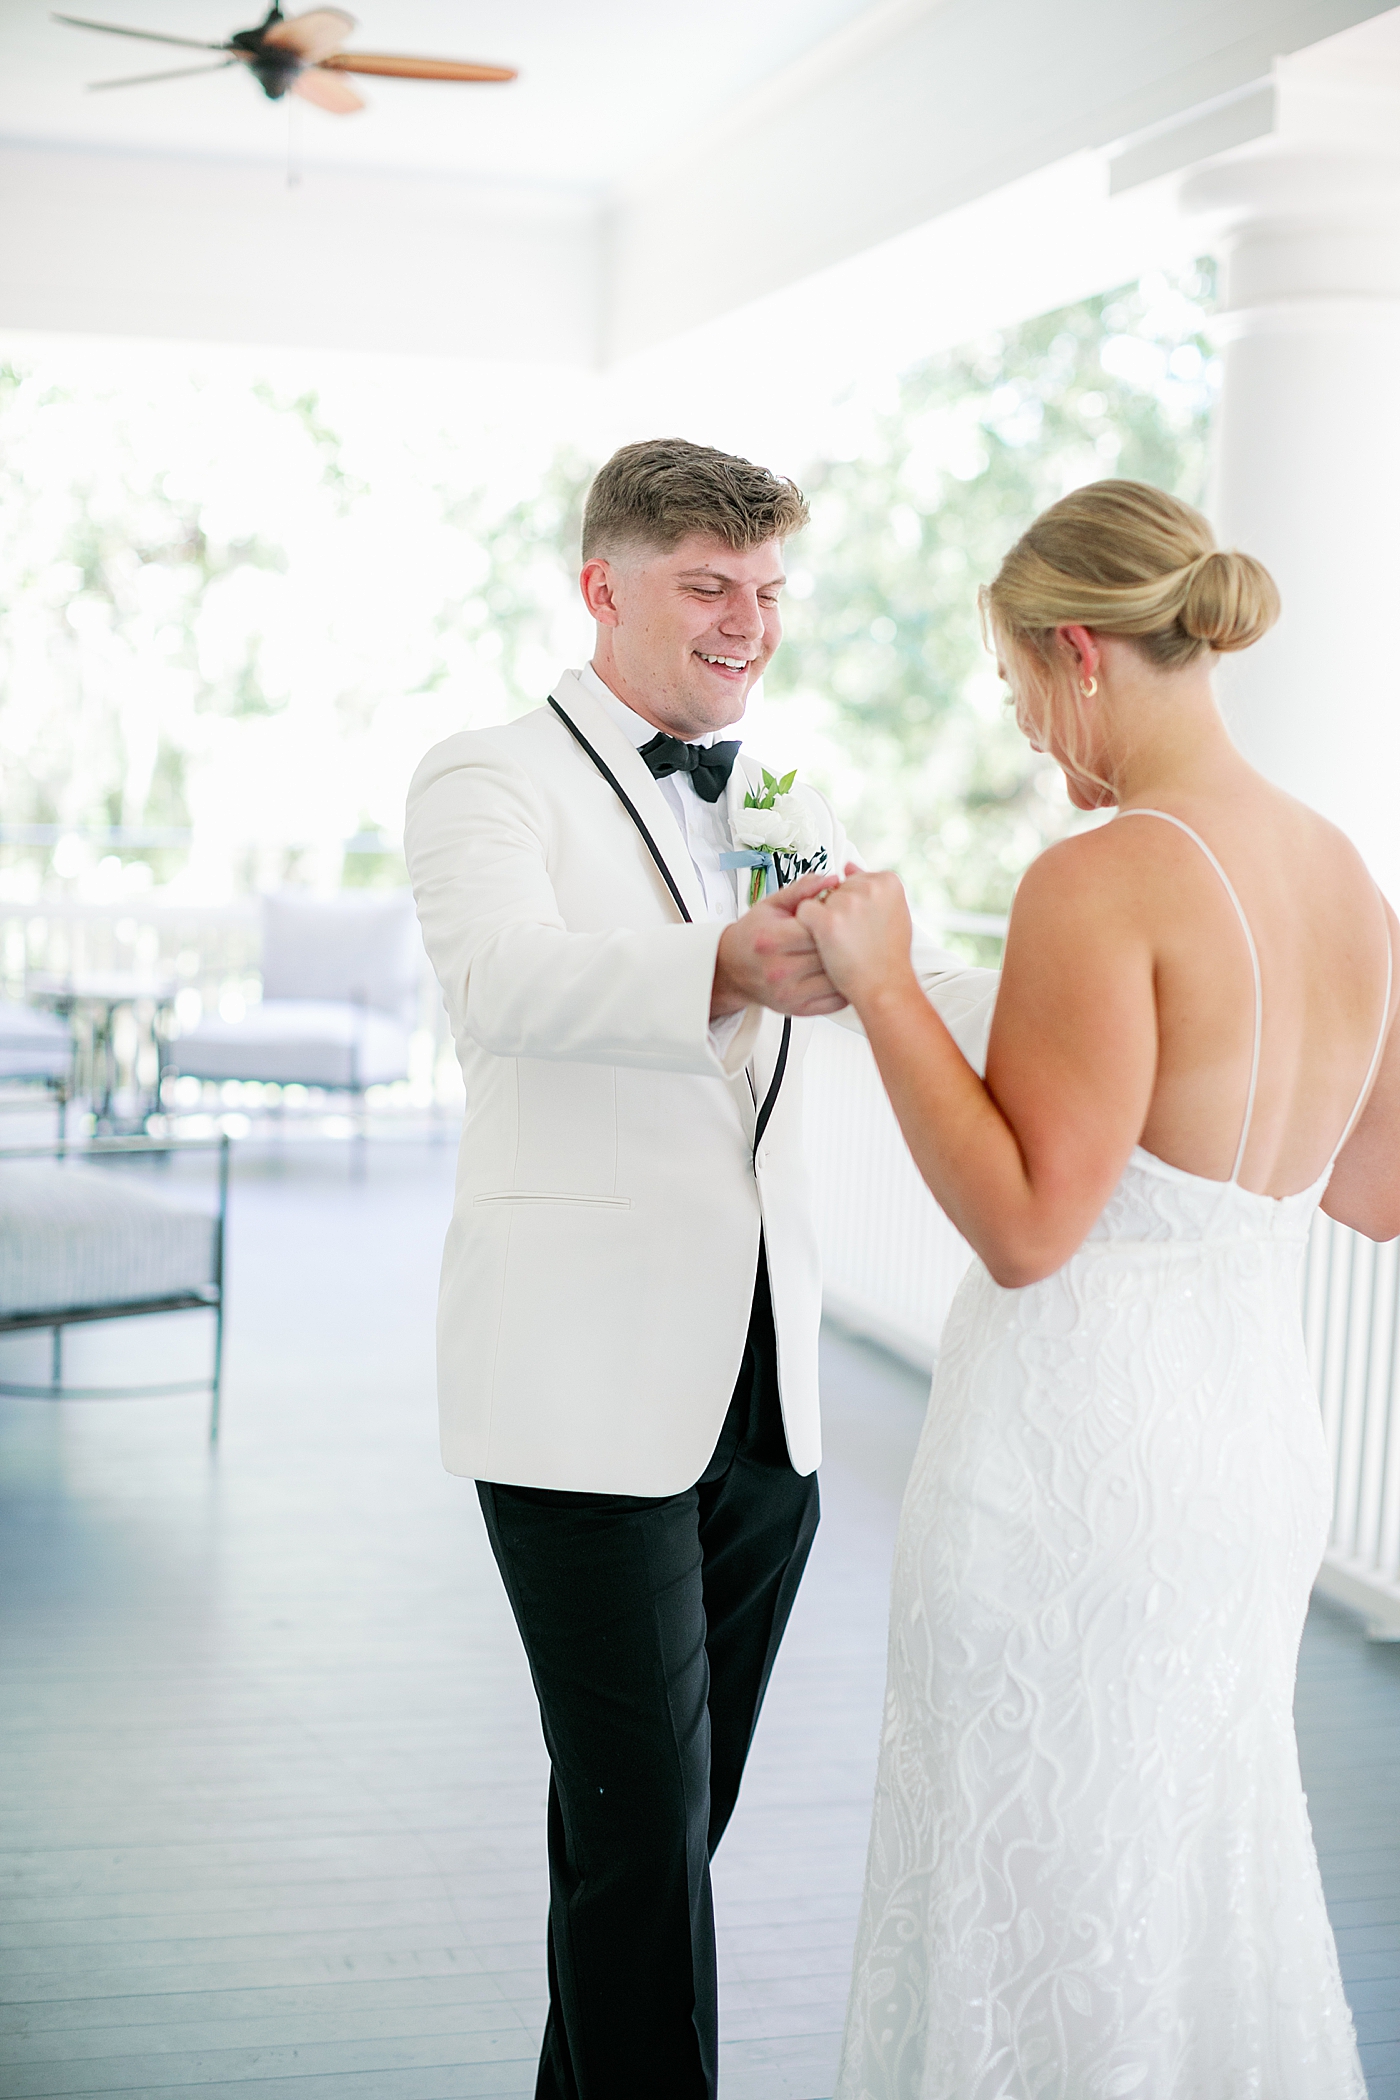 Bride and groom first look on a balcony | Images by Annie Laura Photography